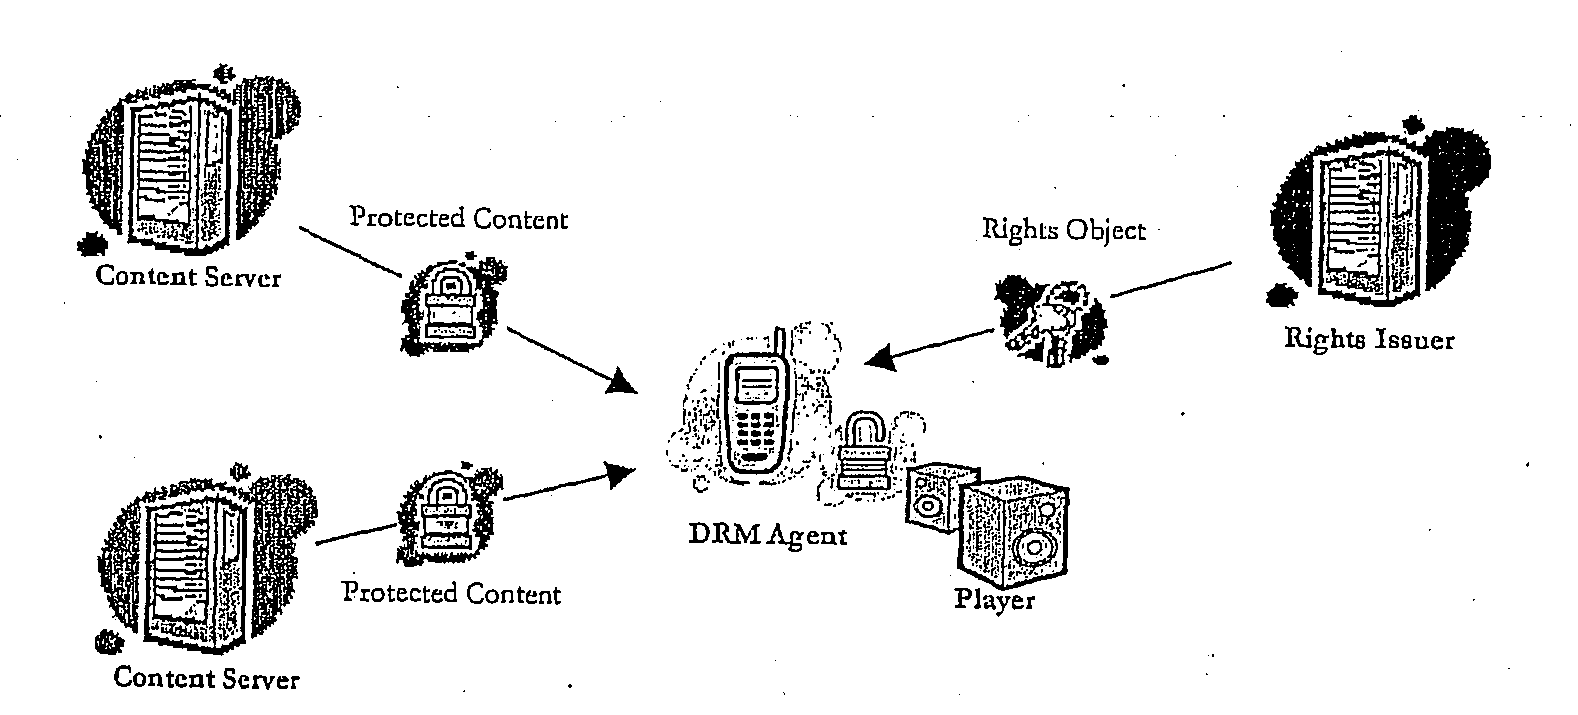 Method of Providing Digital Rights Management for Music Content by Means of a Flat-Rate Subscription